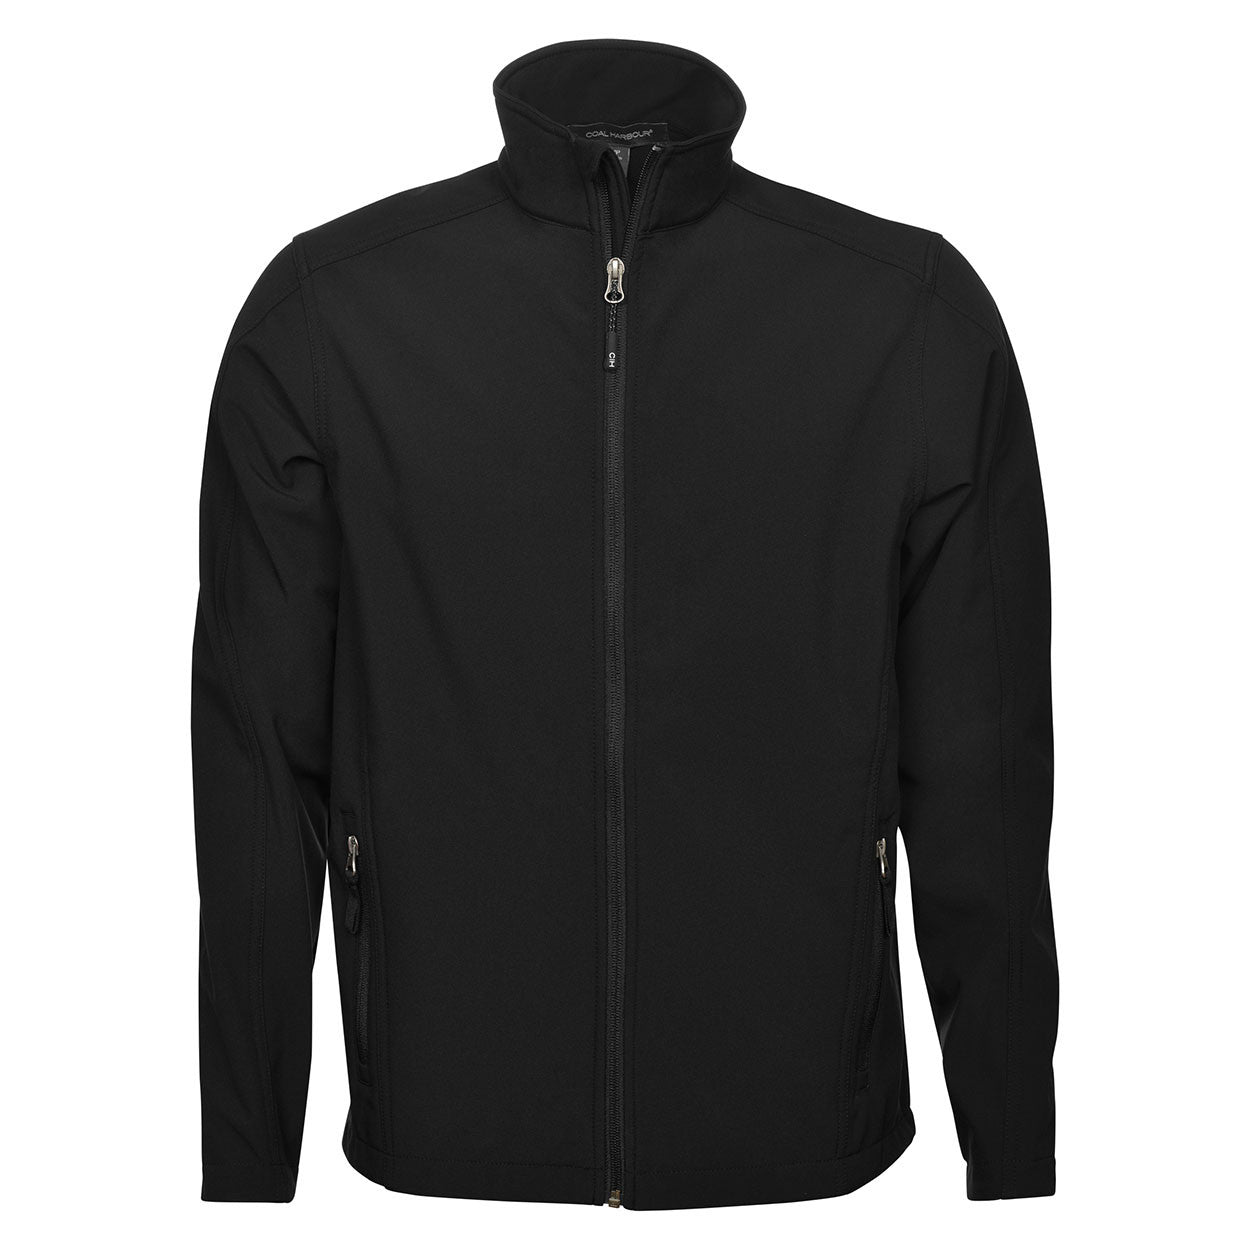 COAL HARBOUR® EVERYDAY SOFT SHELL JACKET. J7603